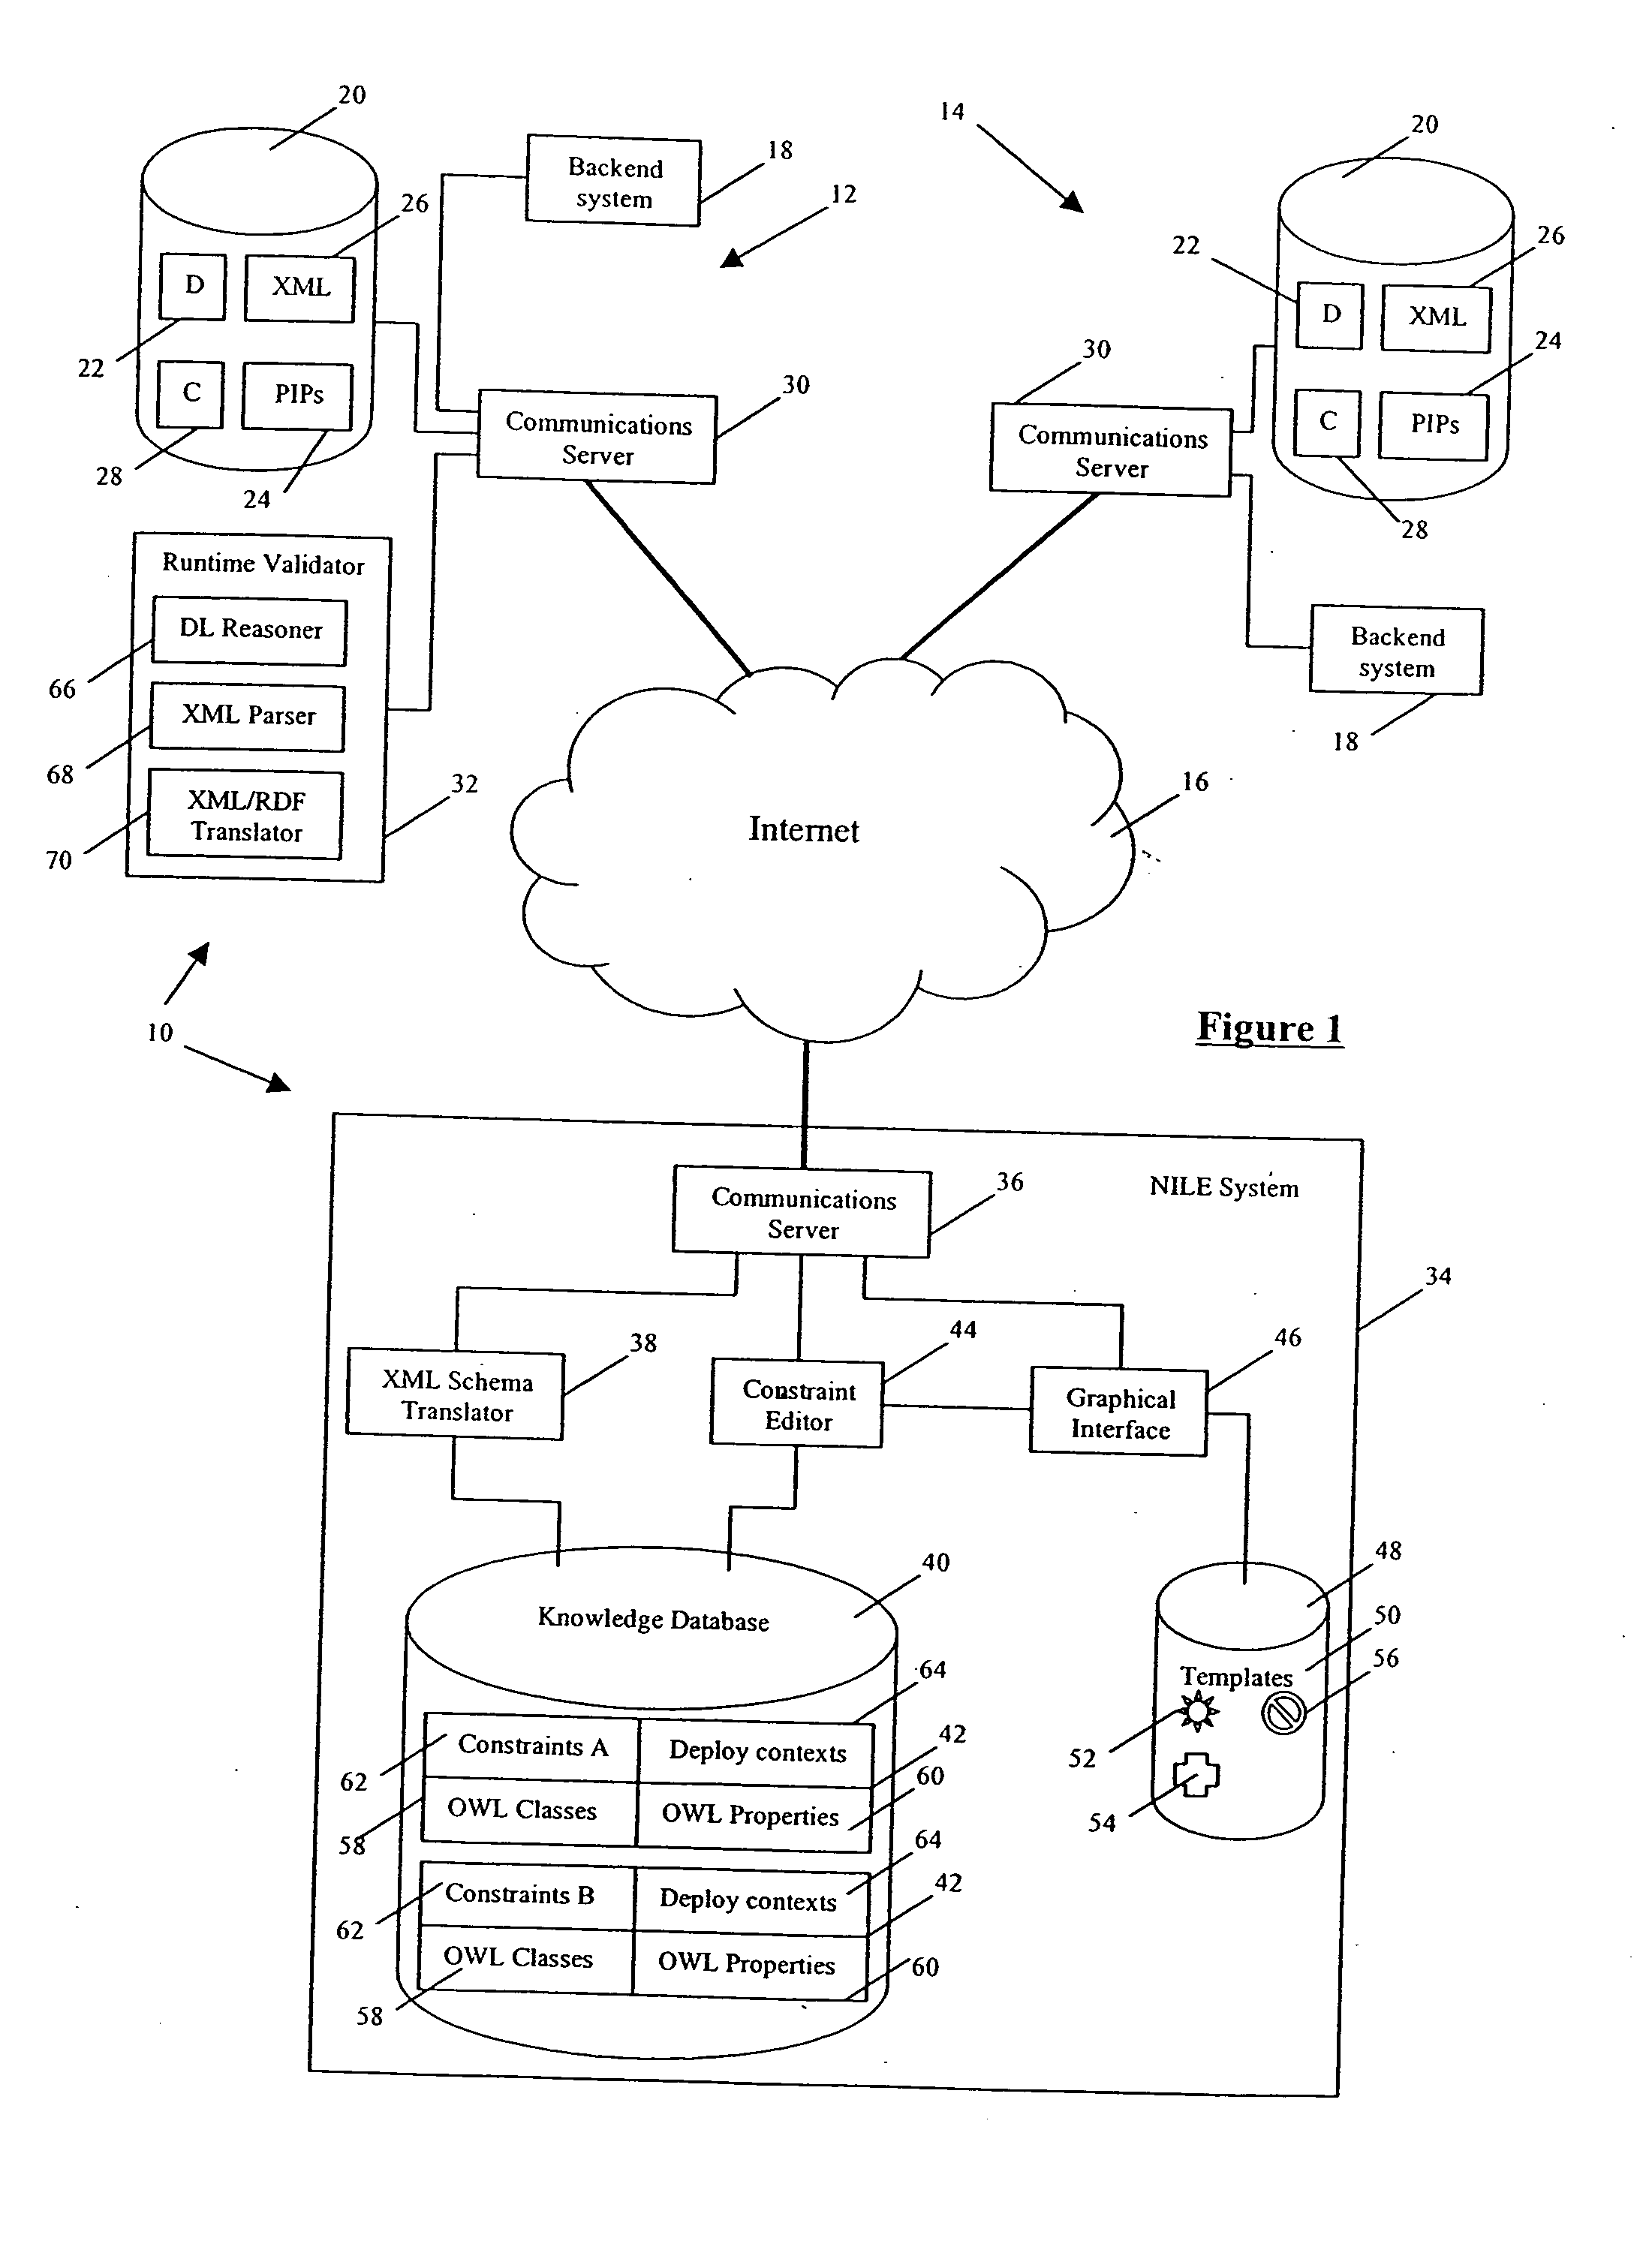 Method and system for integrating interaction protocols between two entities